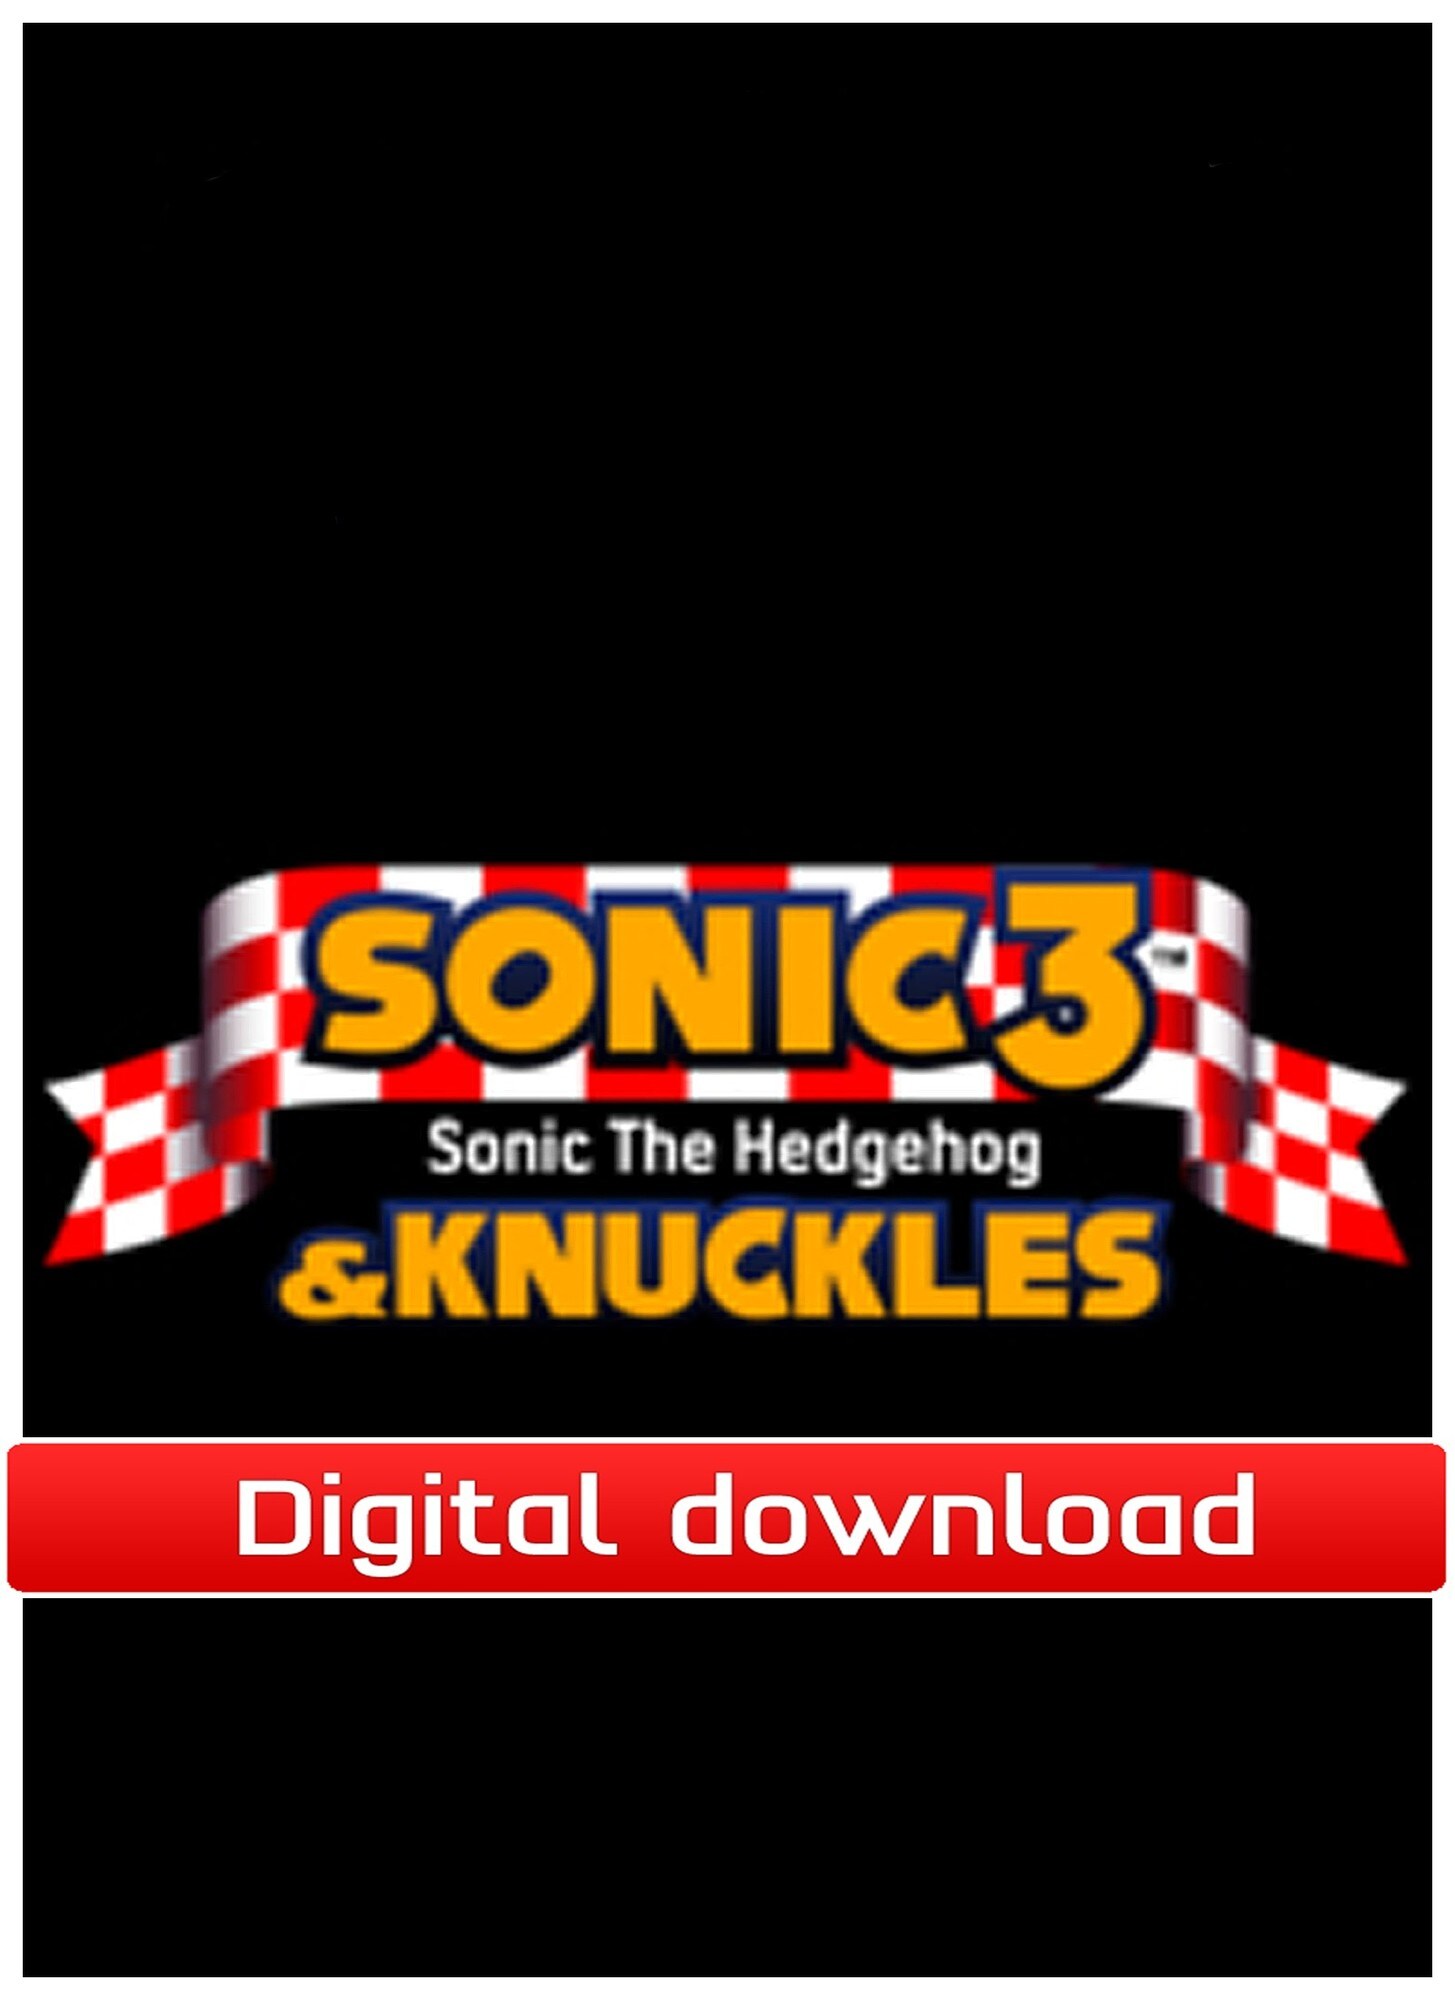 Sonic and knuckles apk download